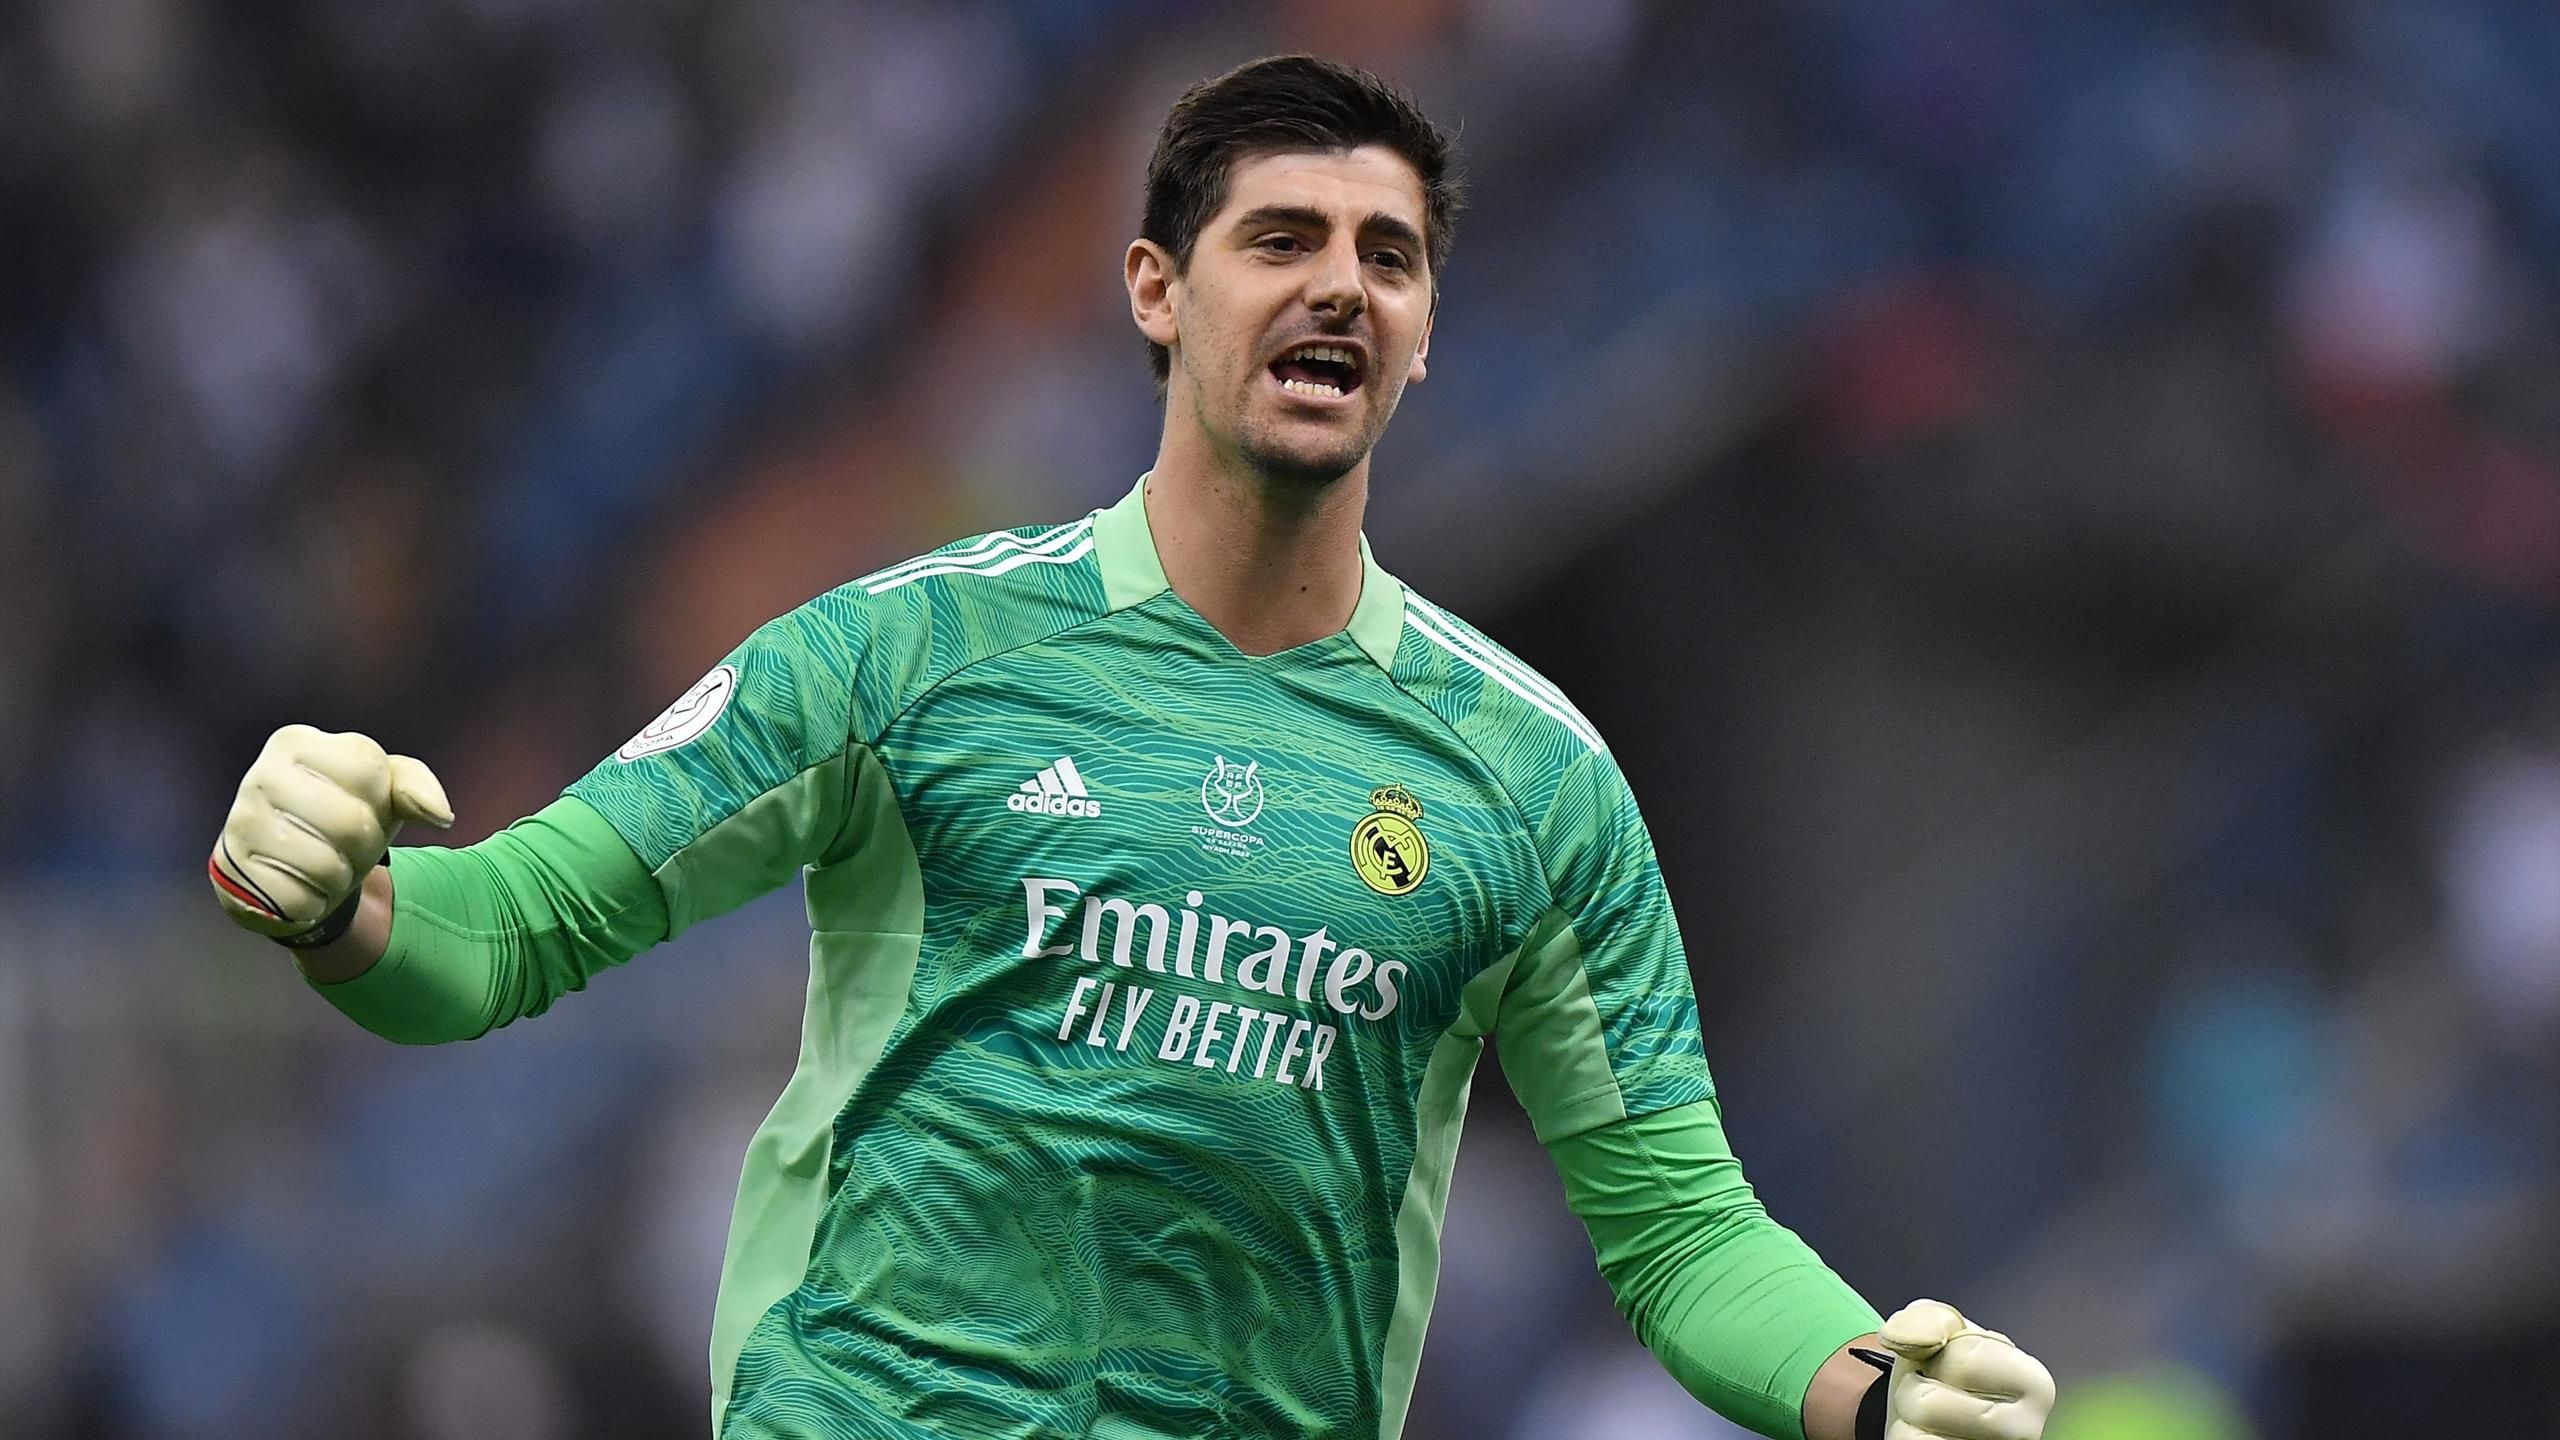 Opinion: Thibaut Courtois is now the best goalkeeper in the world after stellar run of form at Real Madrid